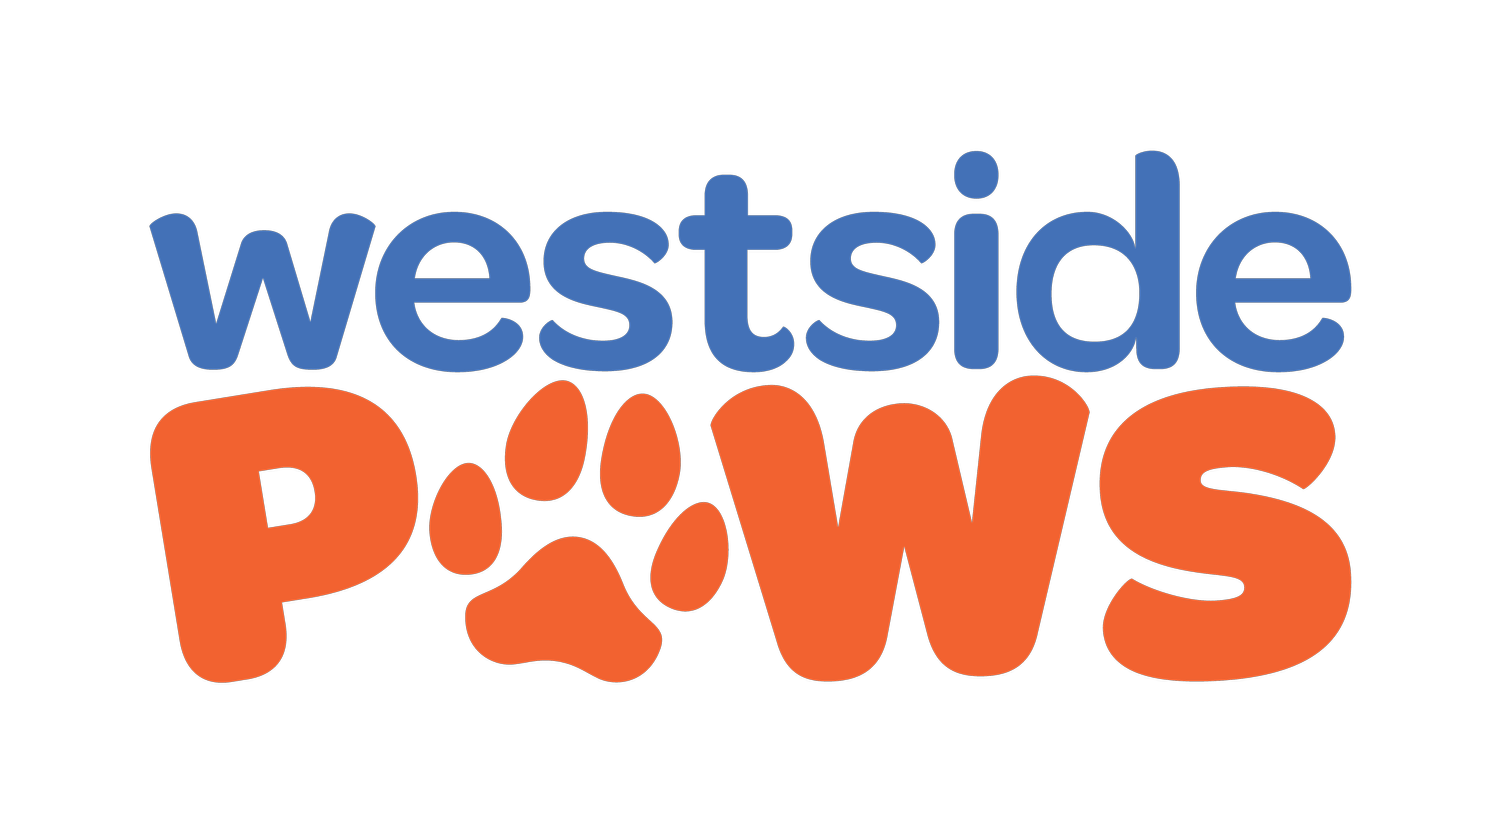 Westside Paws Puppy School, Dog Training and Treat Dealer